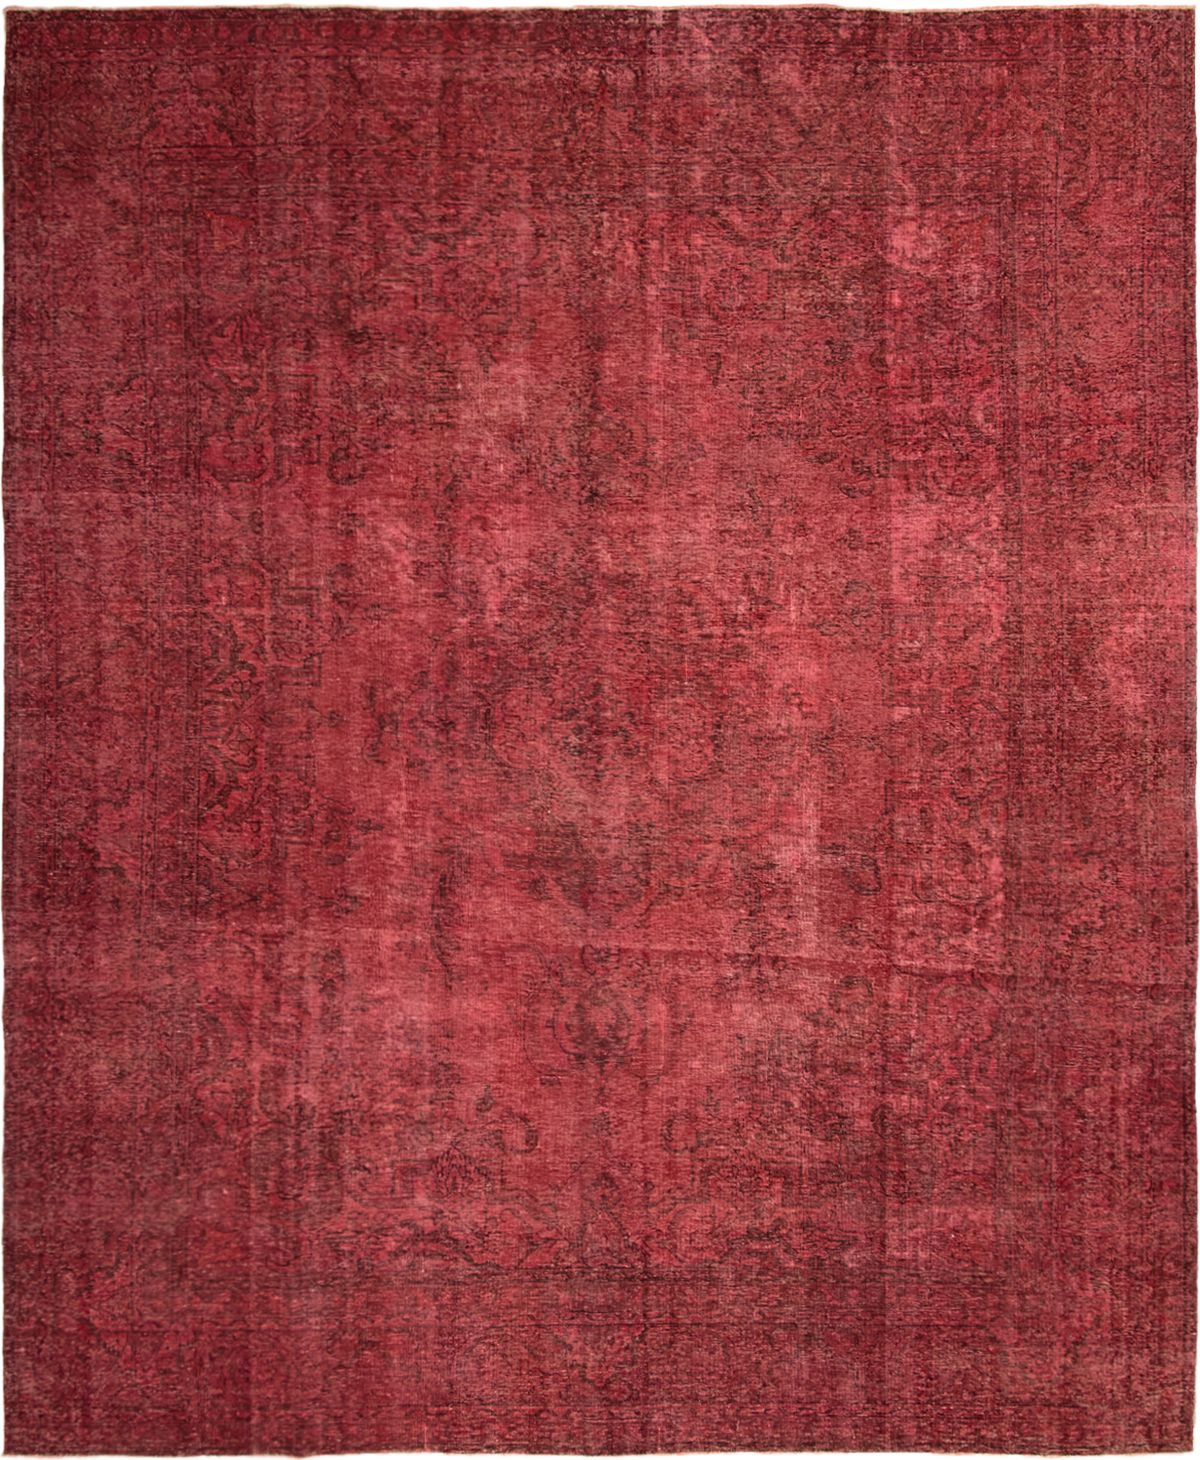 Hand-knotted Color Transition Burgundy Wool Rug 10'3" x 12'4" Size: 10'3" x 12'4"  